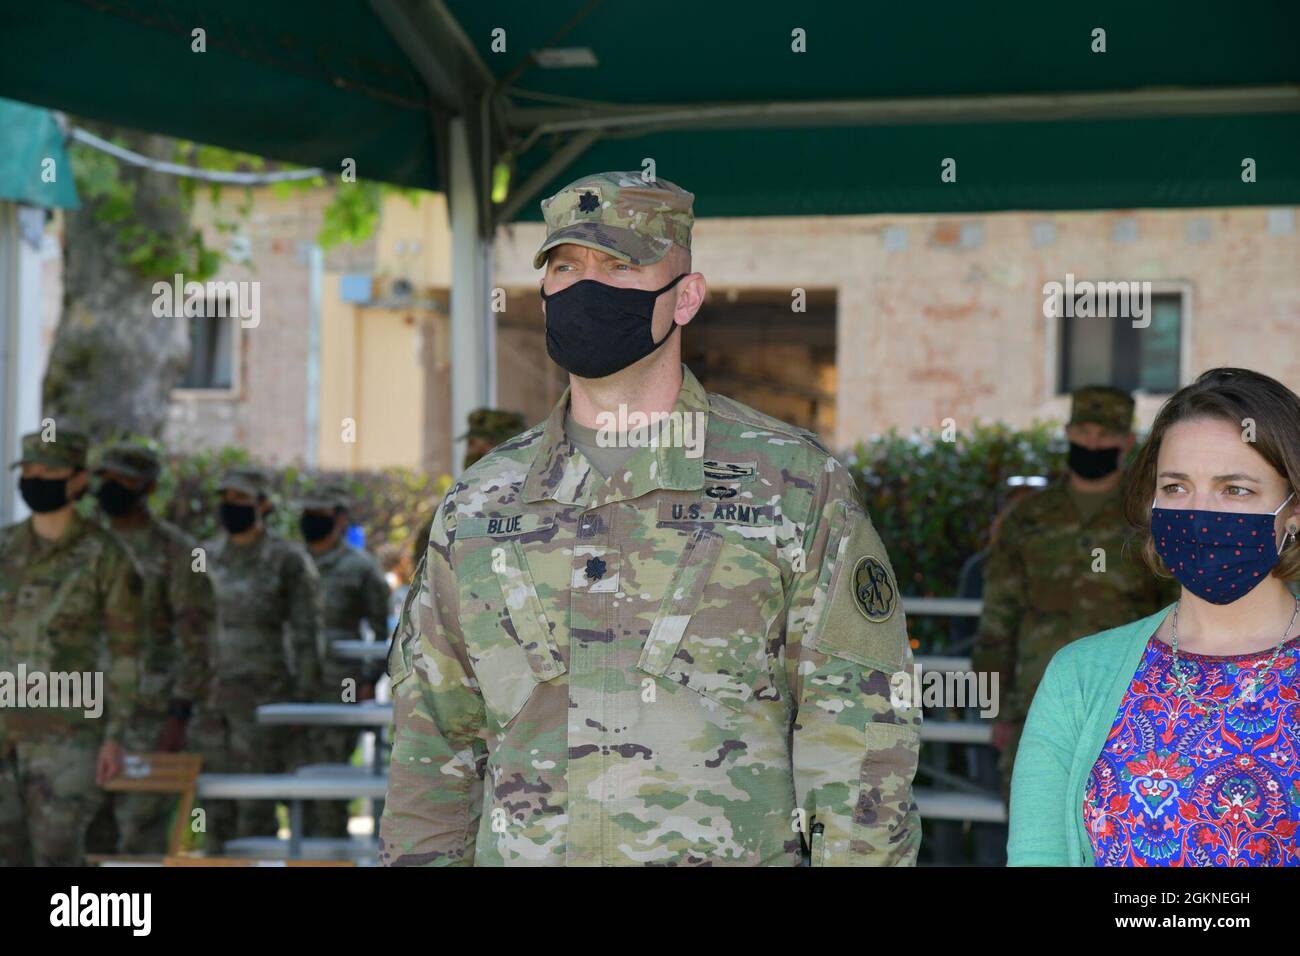 Lt. Col. James M. Blue, the commander 307th Military Intelligence Battalion, stands during a change of command ceremony for the 307th Military Intelligence Battalion at Caserma Ederle in Vicenza, Italy, June 4, 2021. Stock Photo